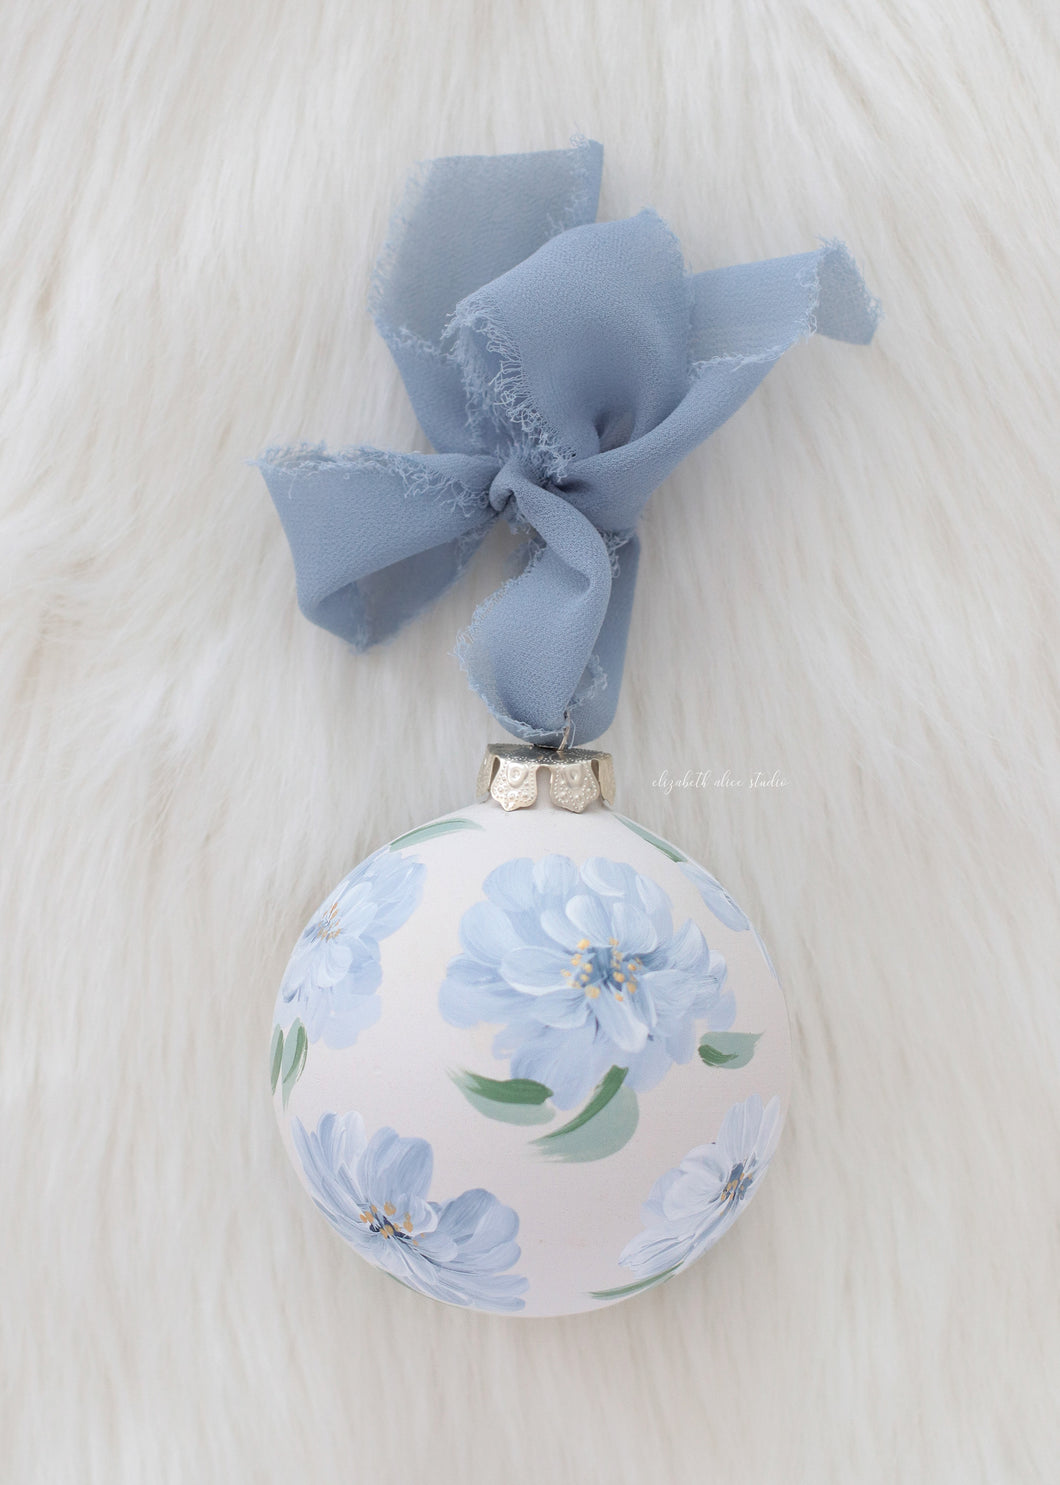 Peony hand-painted ornament